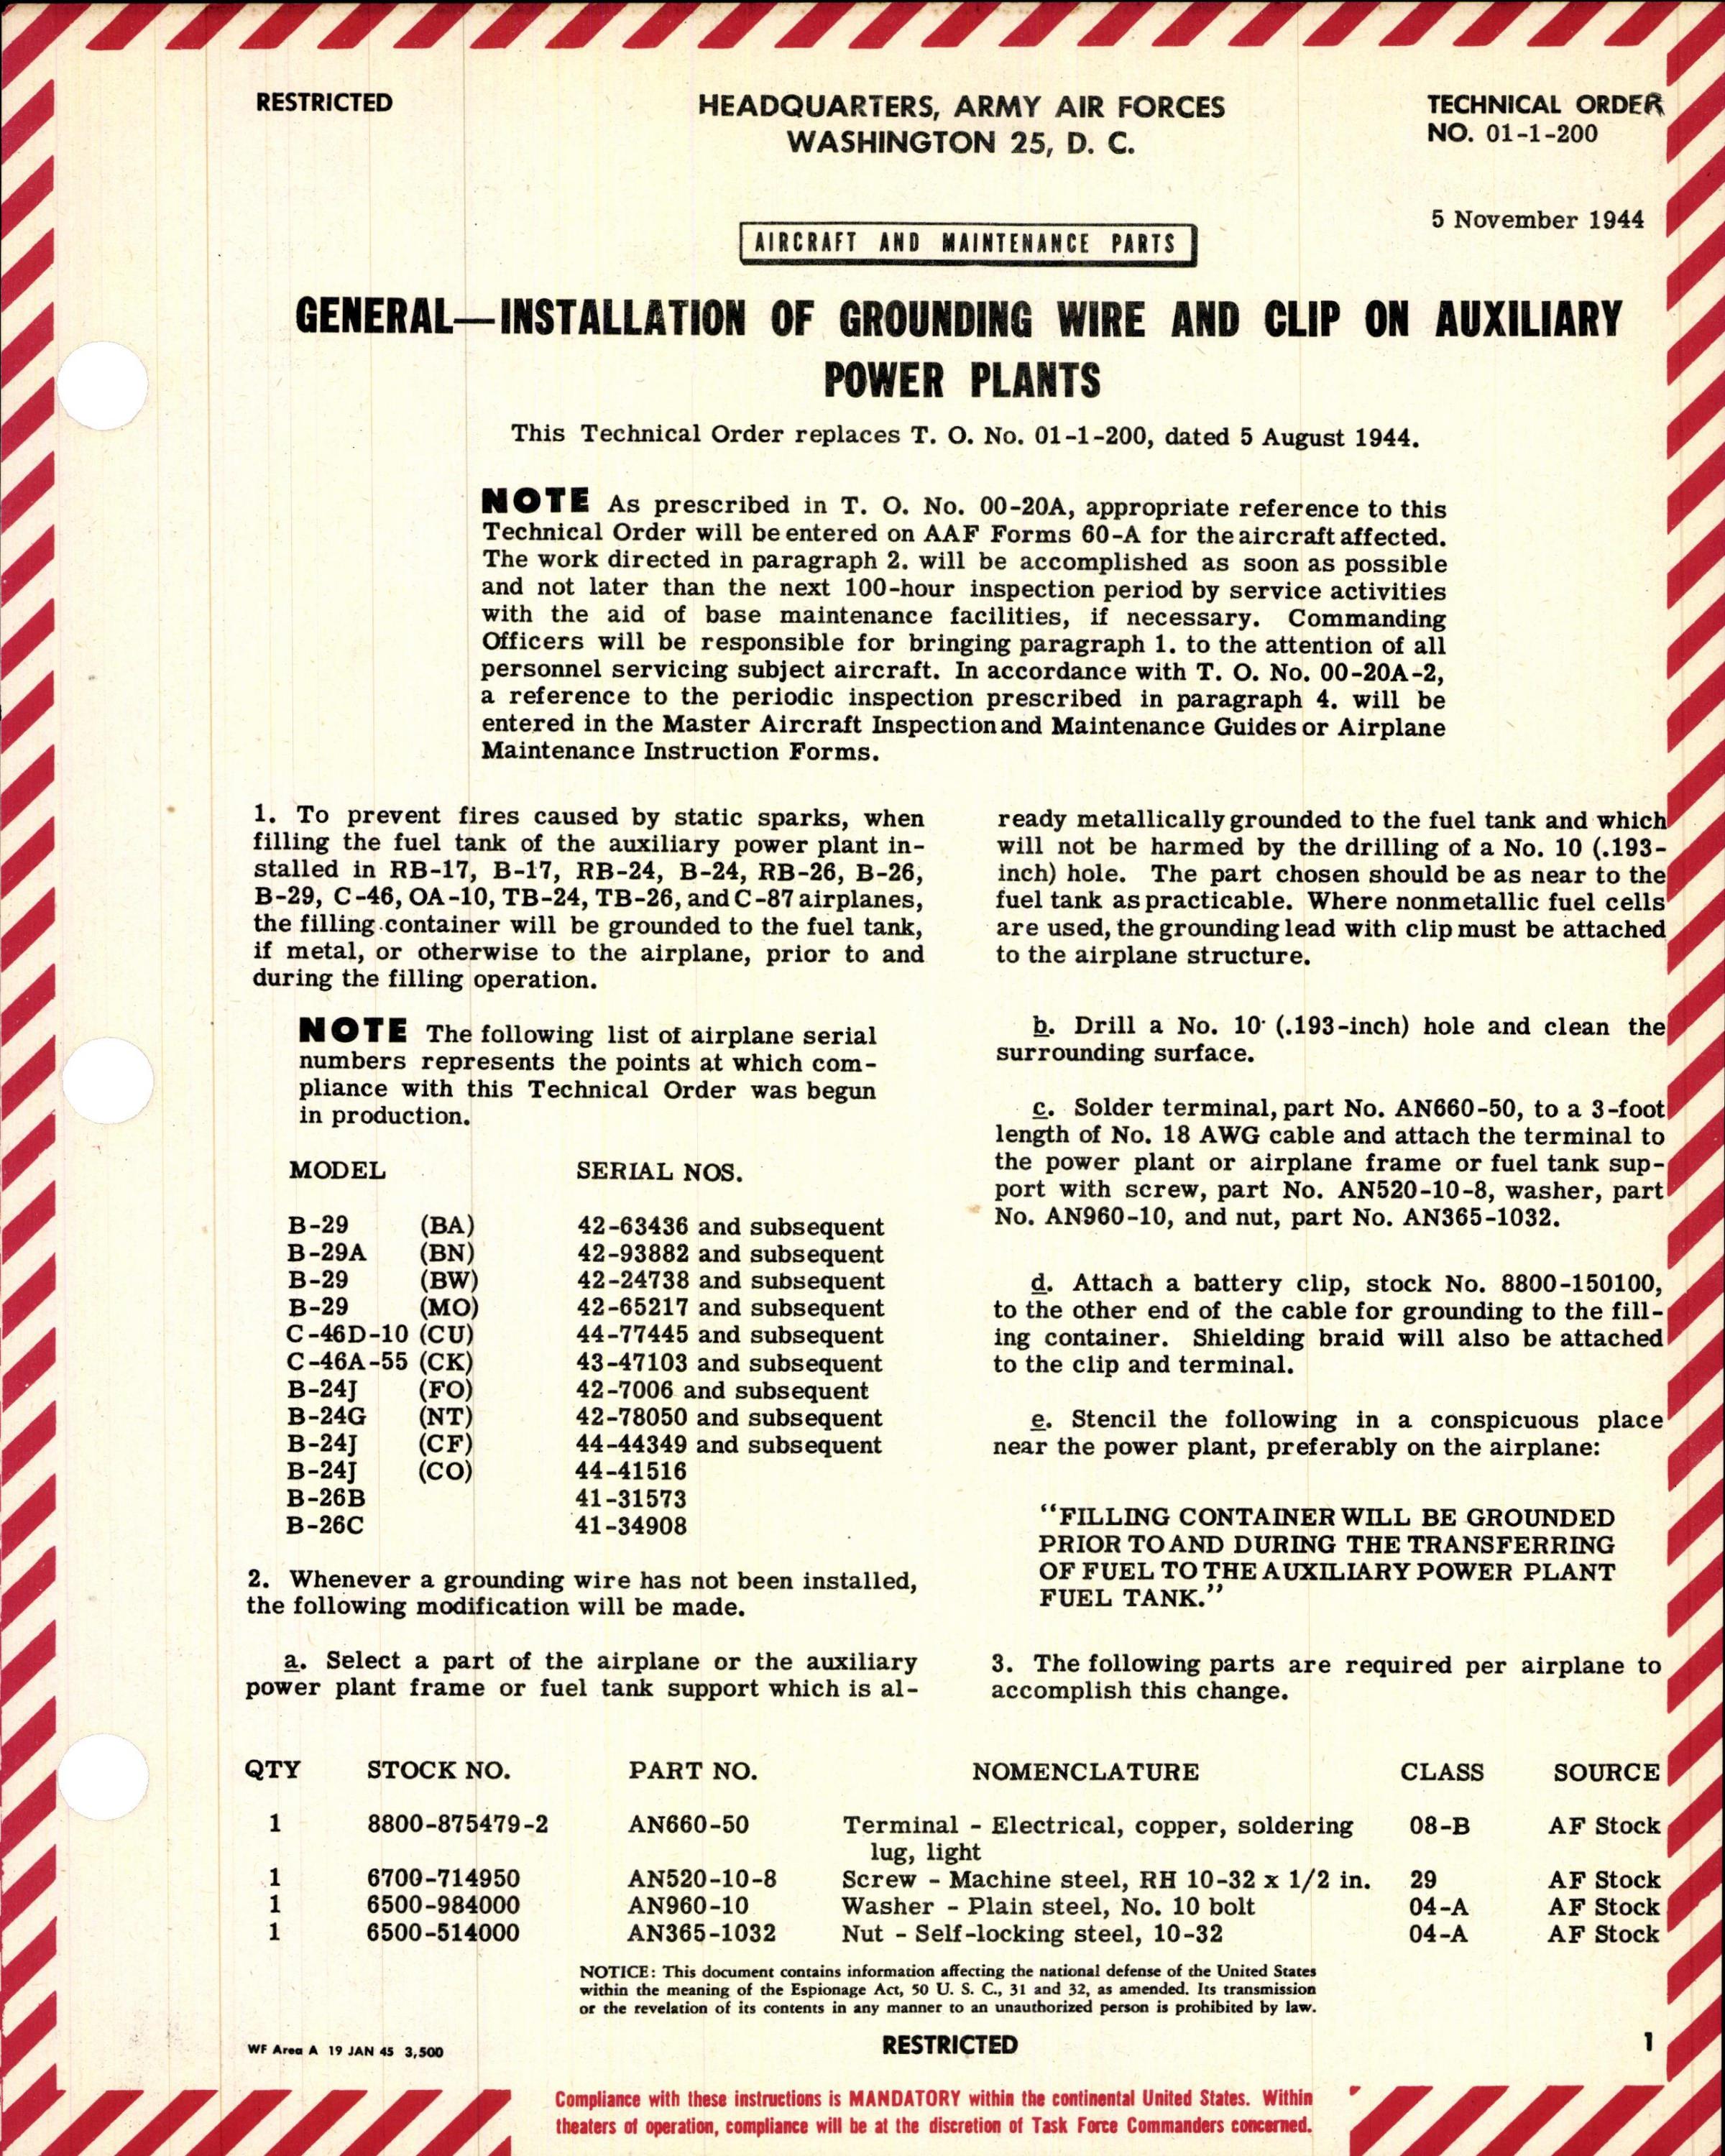 Sample page 1 from AirCorps Library document: Installation of Grounding Wire and Clip on Auxiliary Power Plants